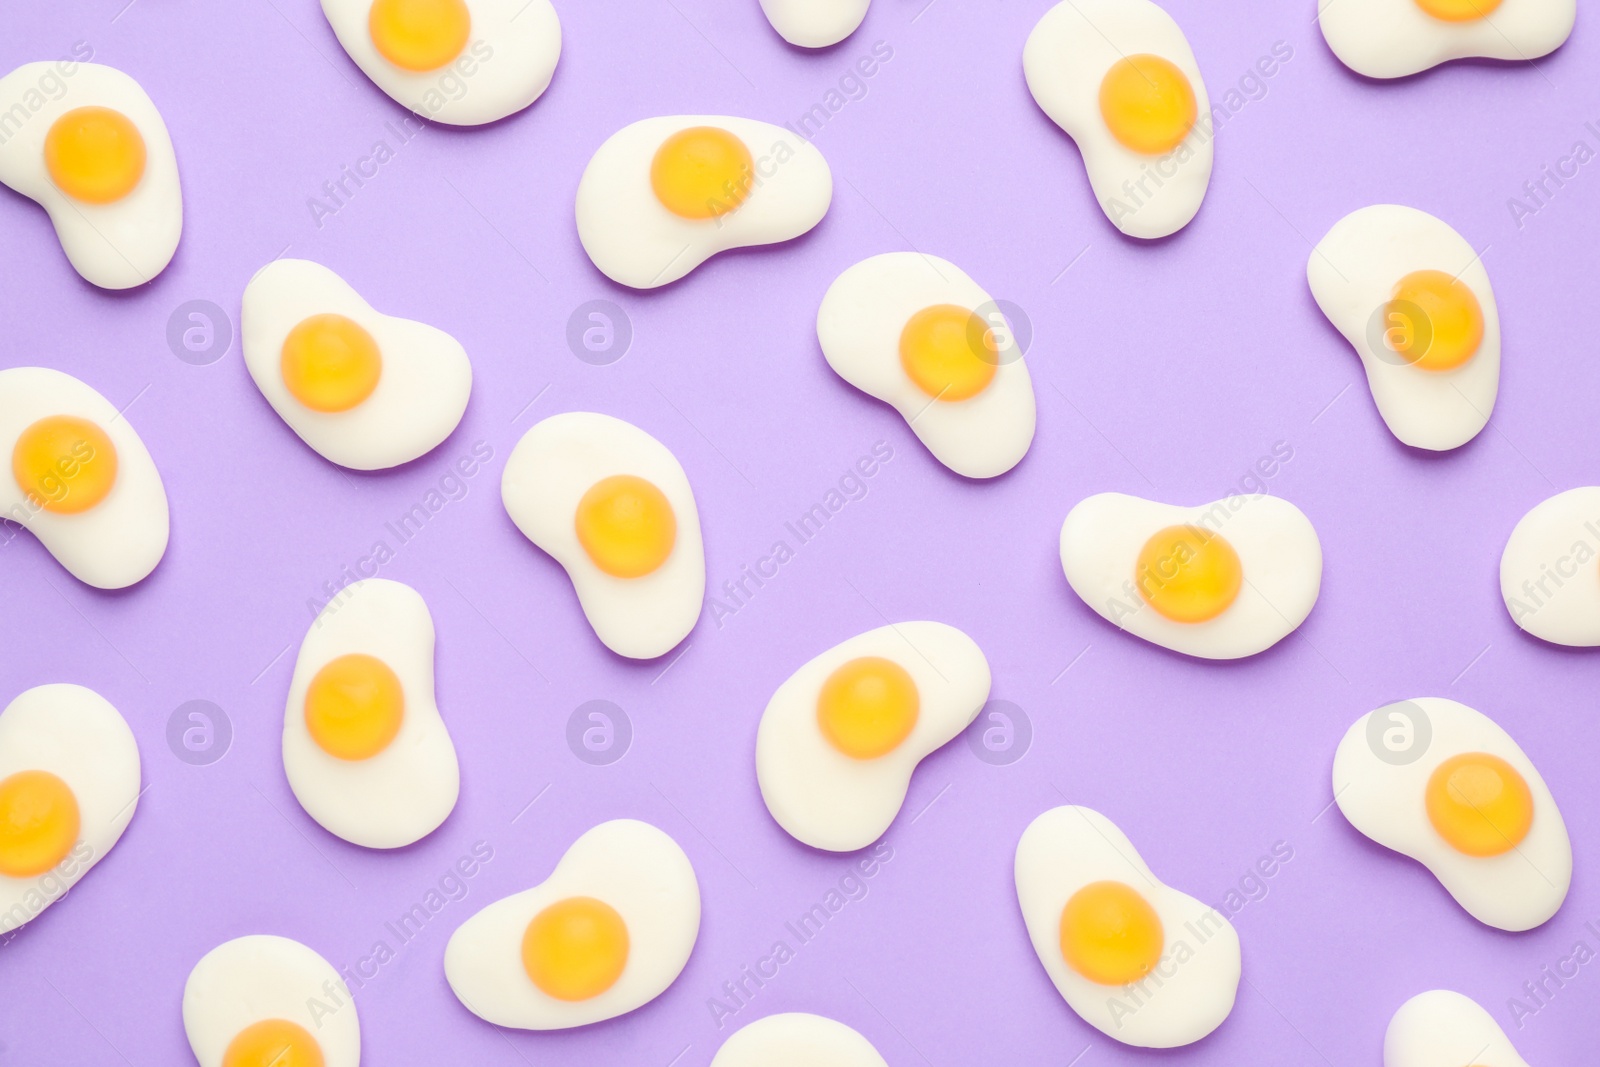 Photo of Tasty jelly candies in shape of egg on lilac background, flat lay